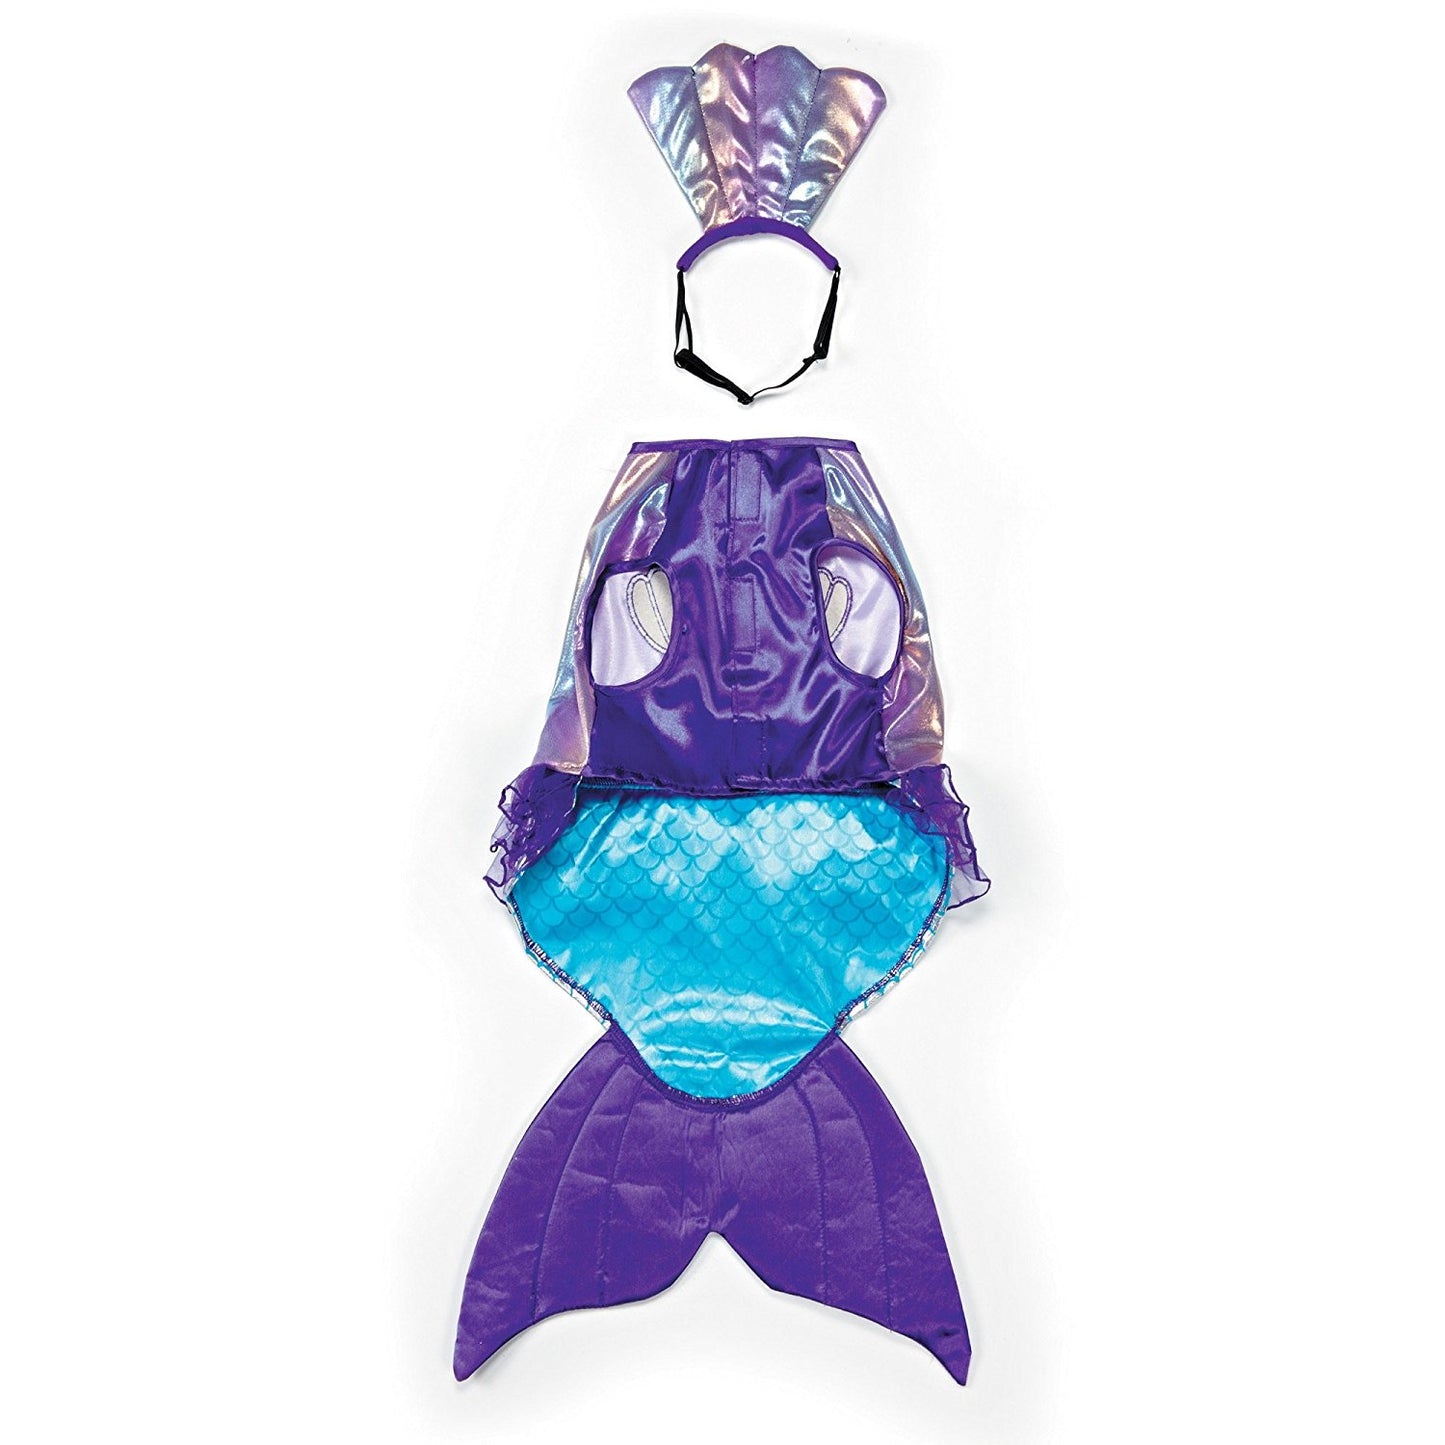 Zack & Zoey Iridescent Mermaid Costume for Dogs, 8"/X-Small